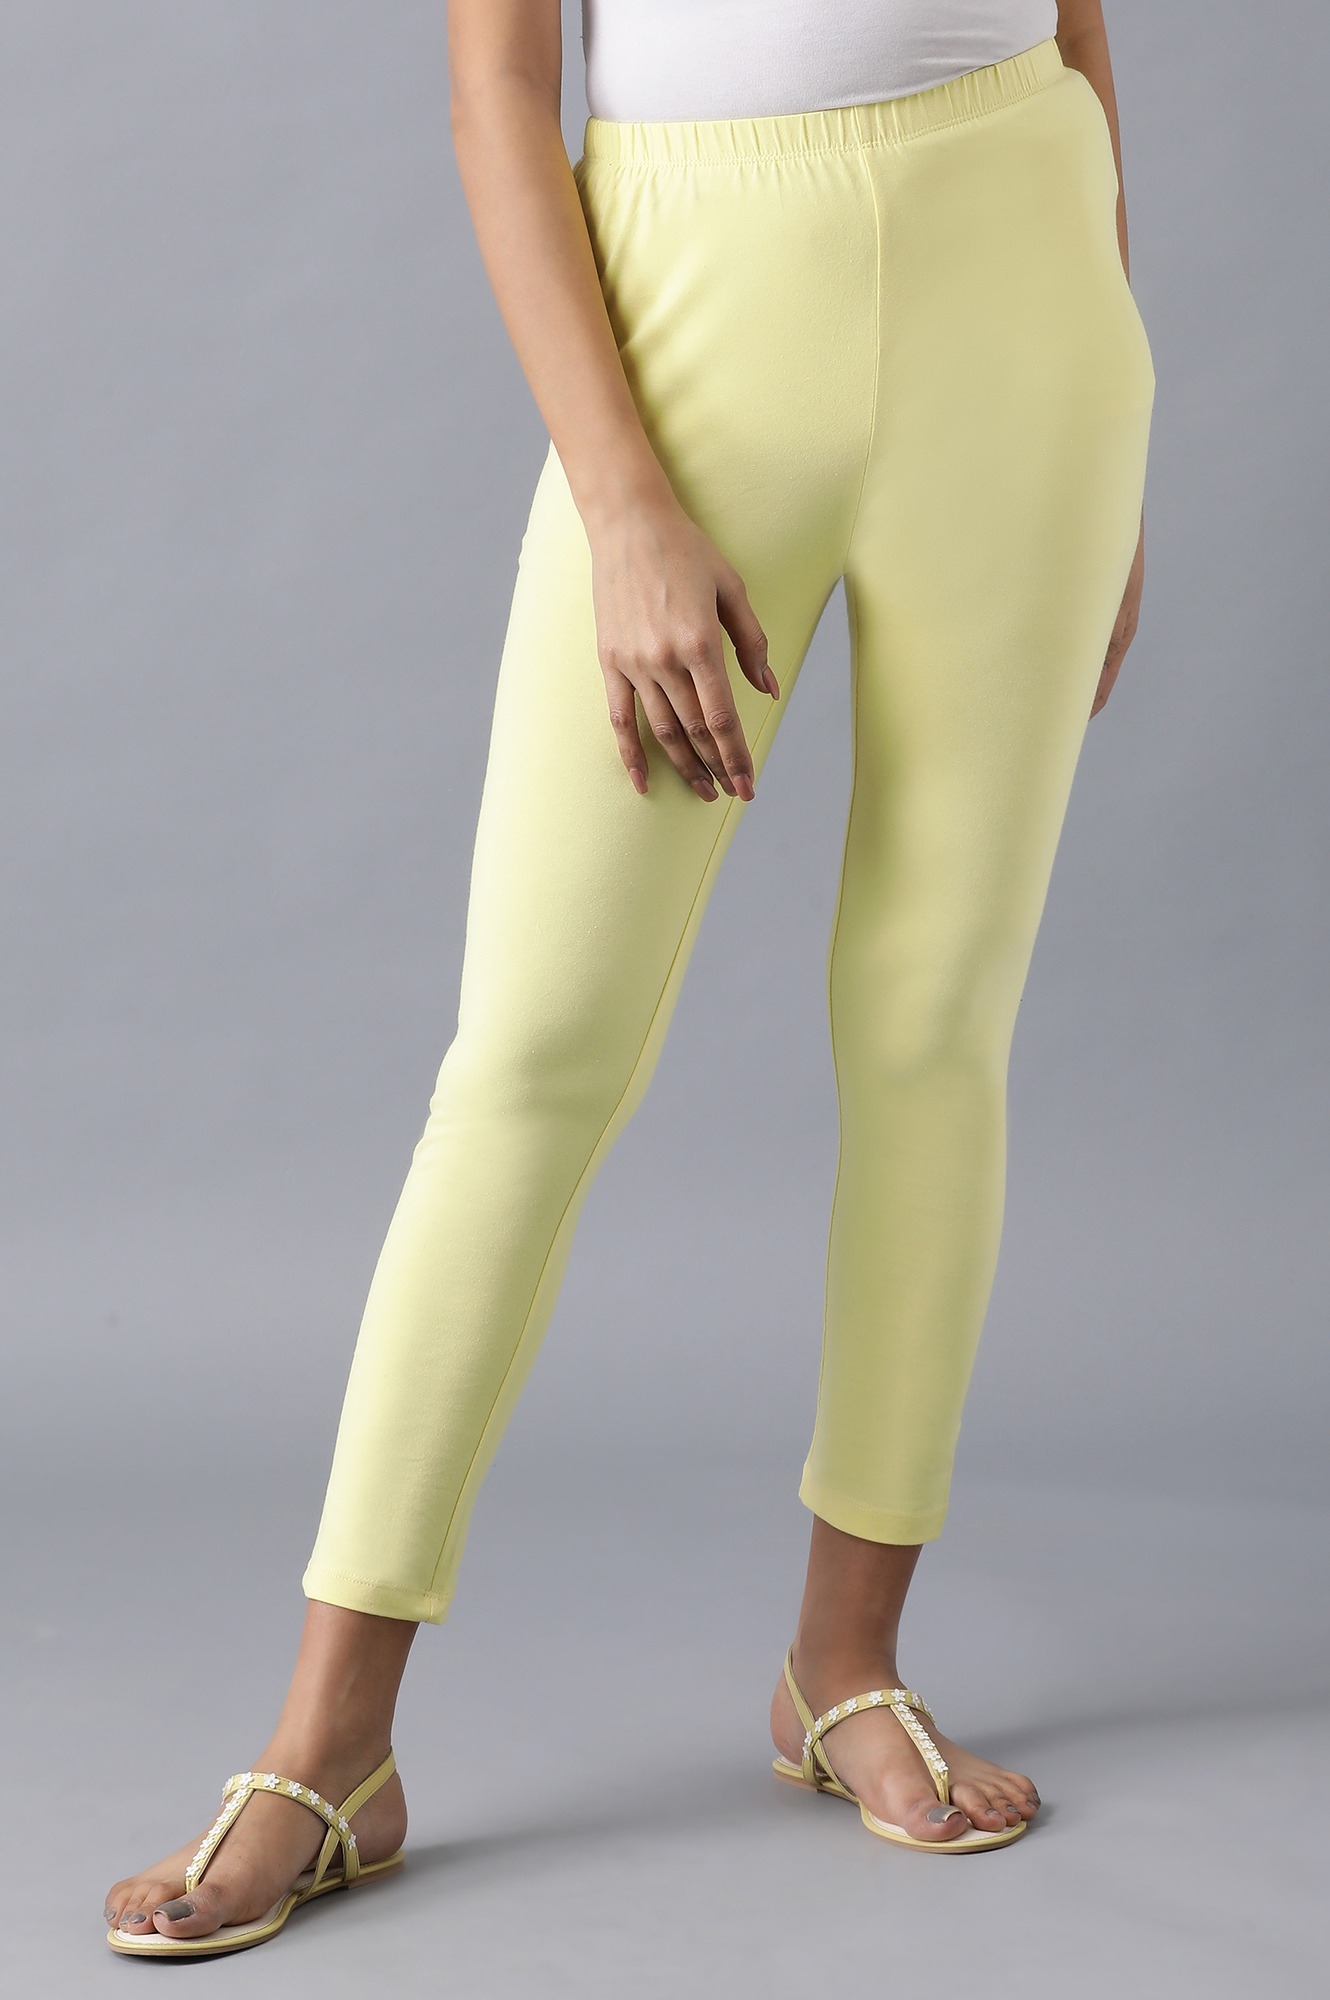 Elleven | Yellow Solid Tights